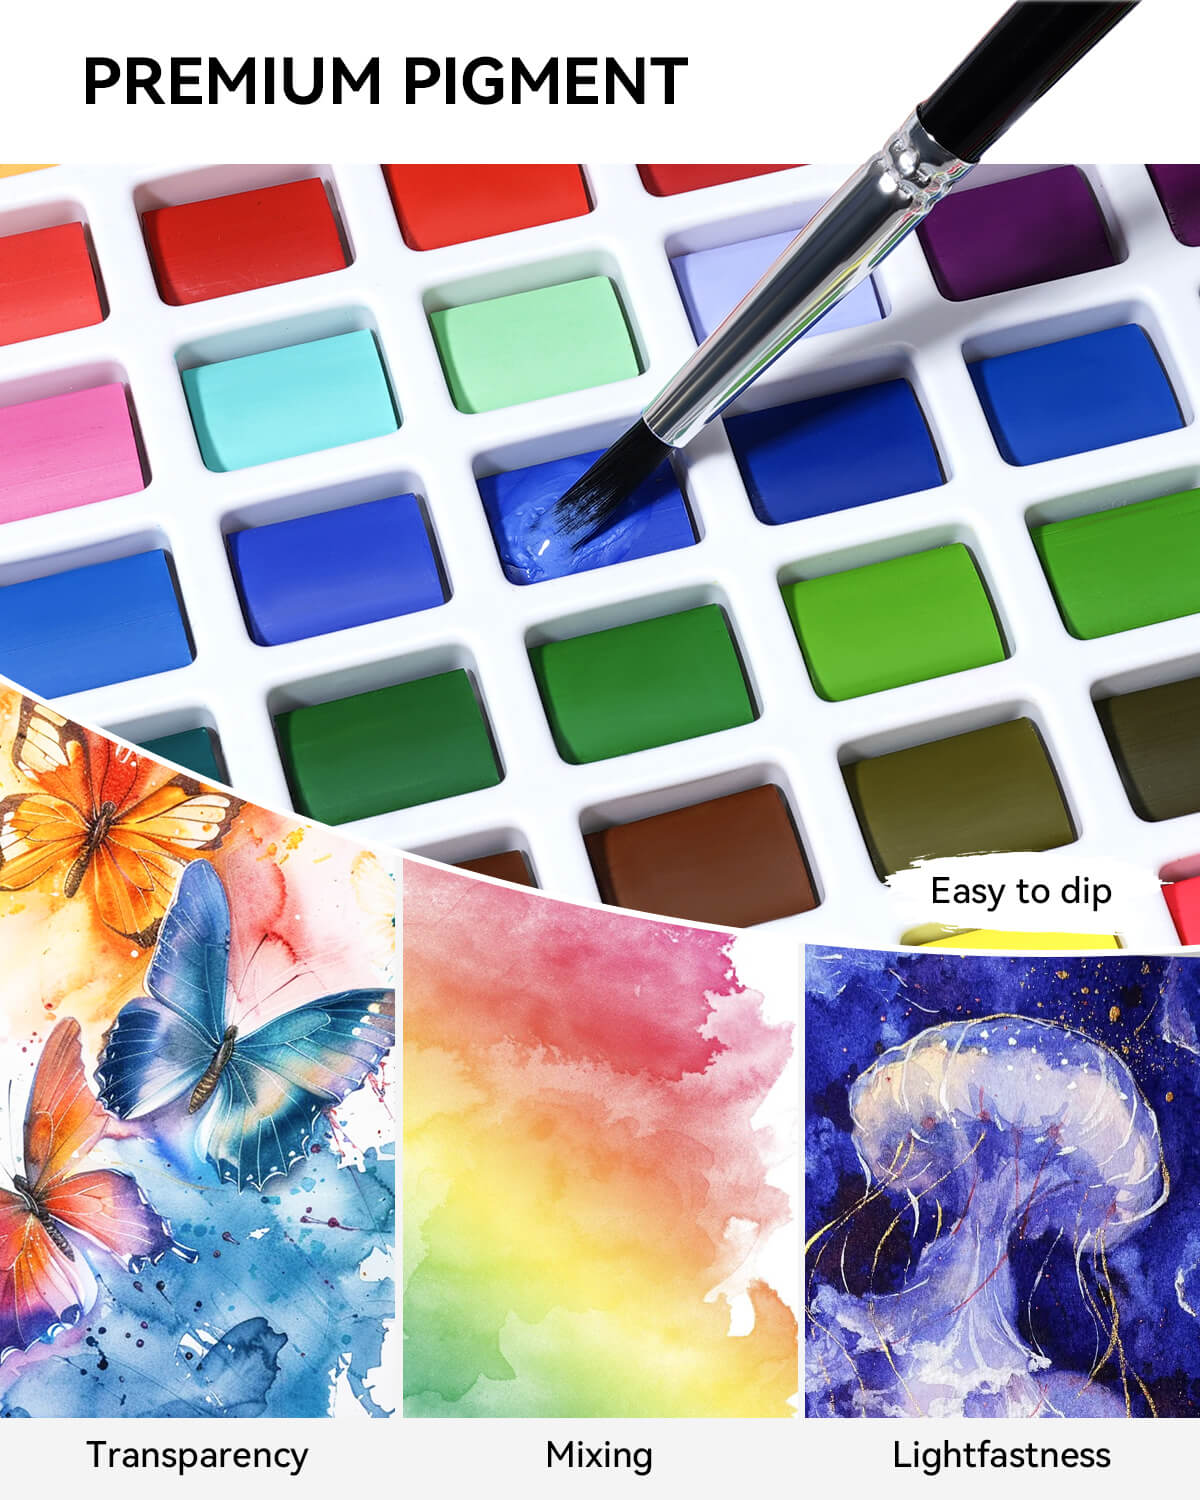 Lightwish Watercolor Paint Set 128 Colors, with Watercolor Paper, Brush, Pencils, Erasers